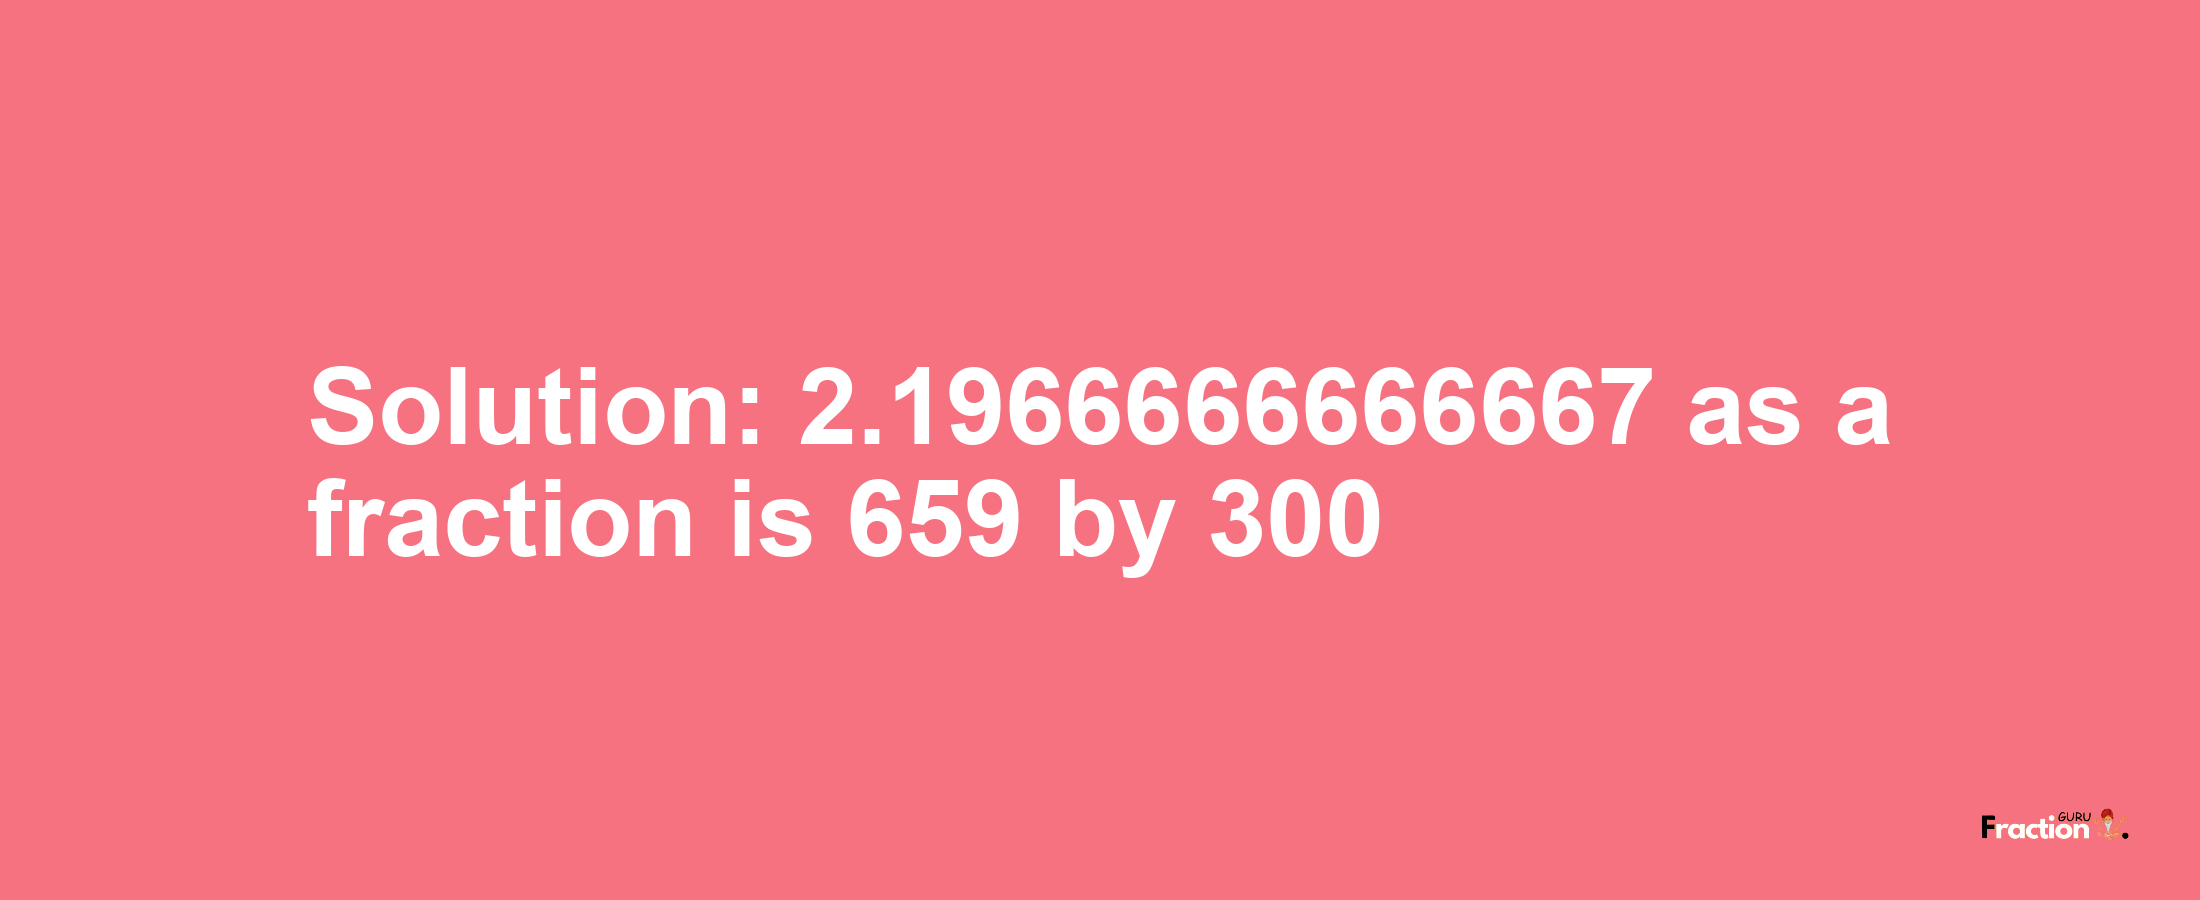 Solution:2.1966666666667 as a fraction is 659/300